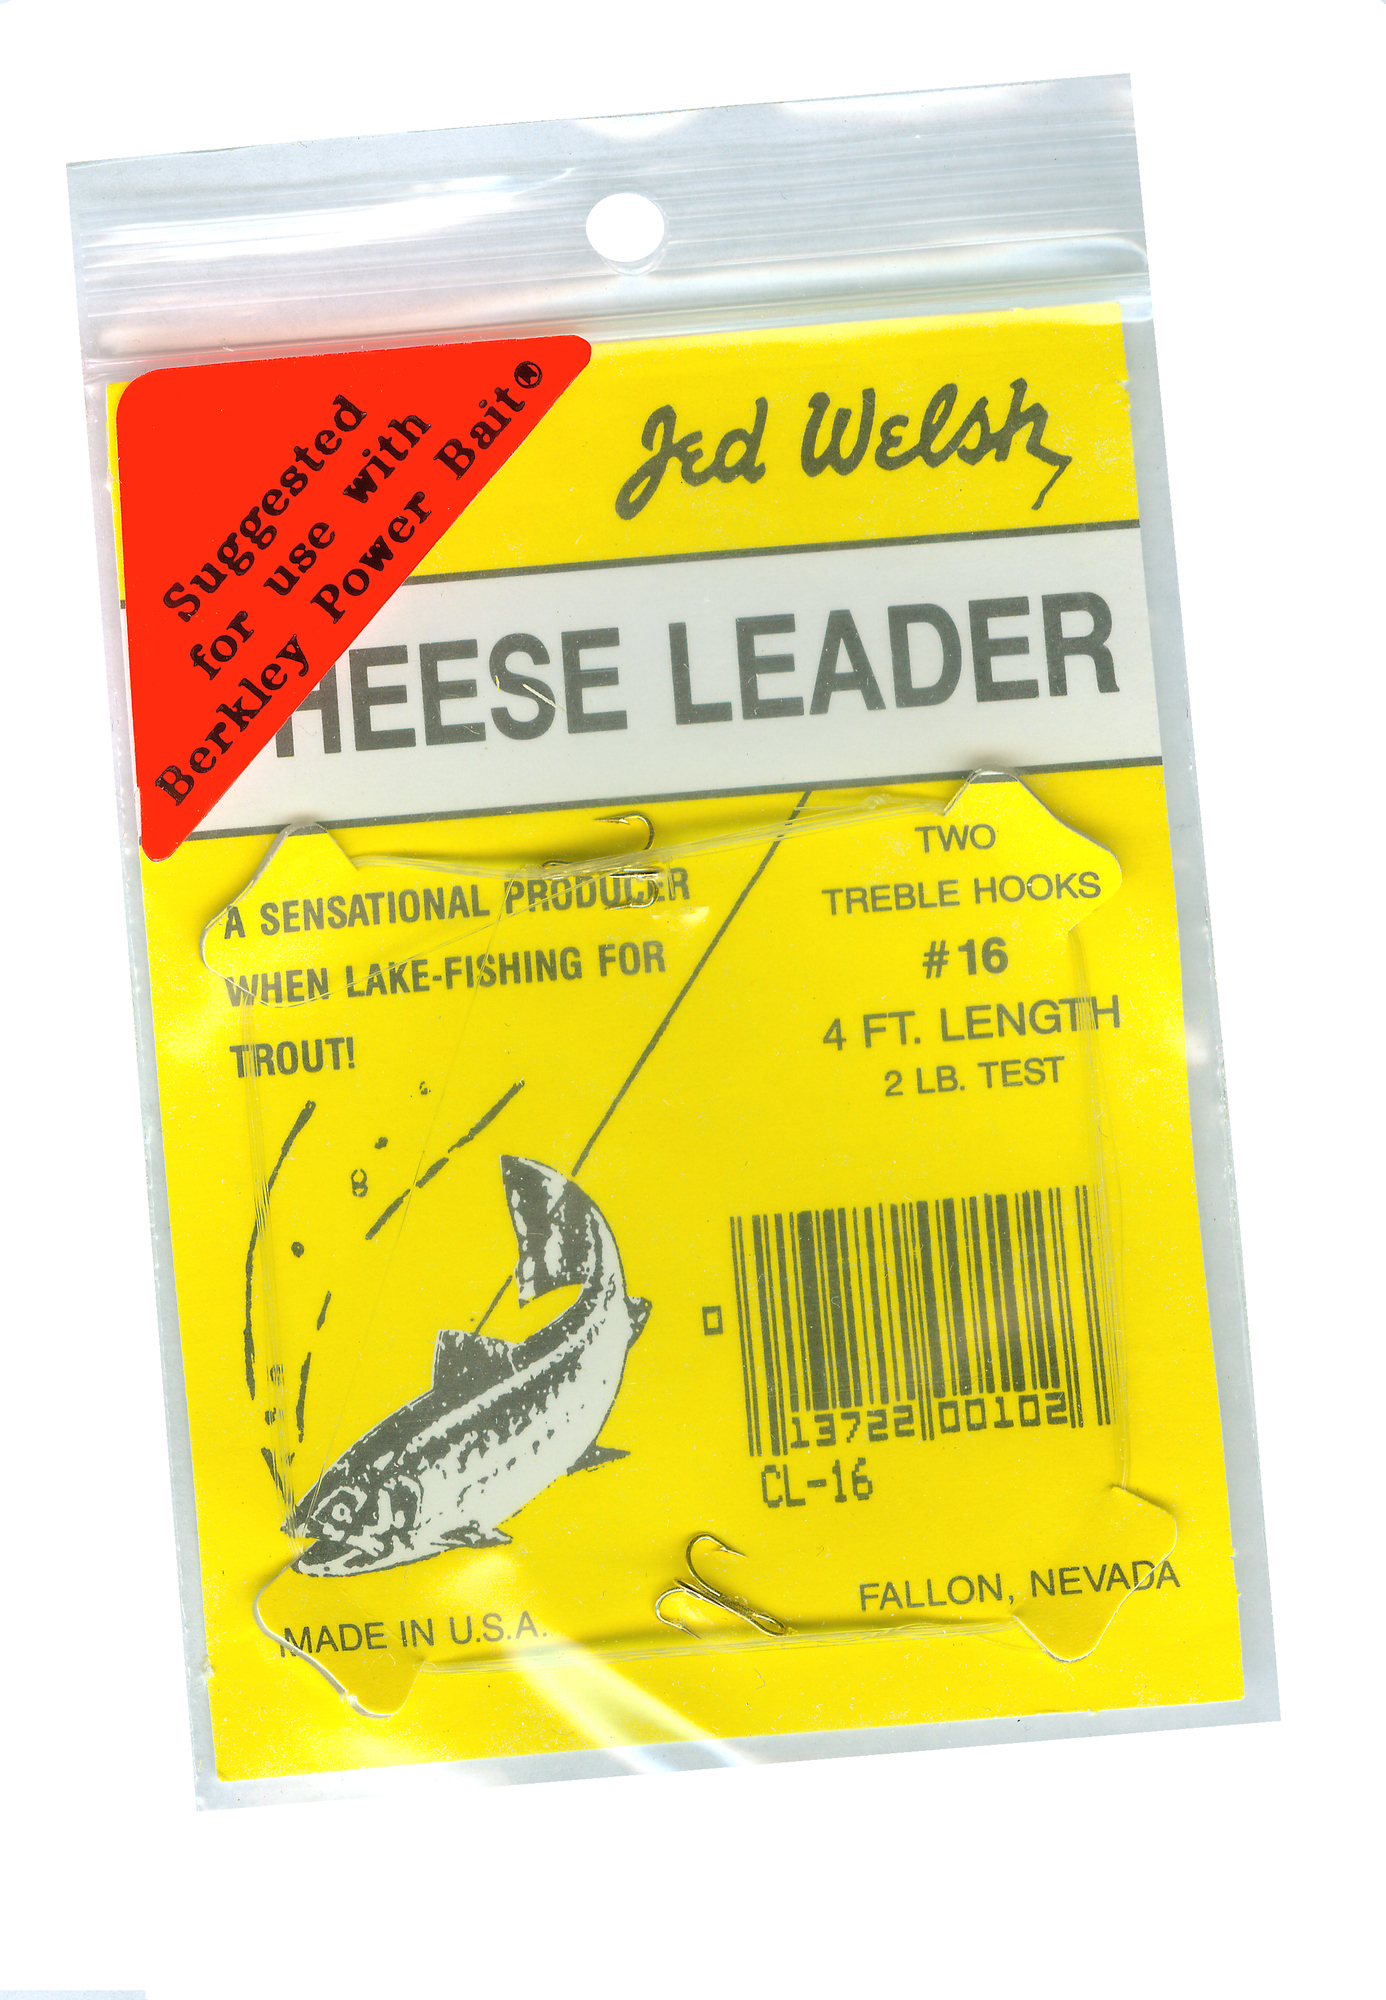 Jed Welsh CL16 Cheese Leader Sz 16 | 013722001026